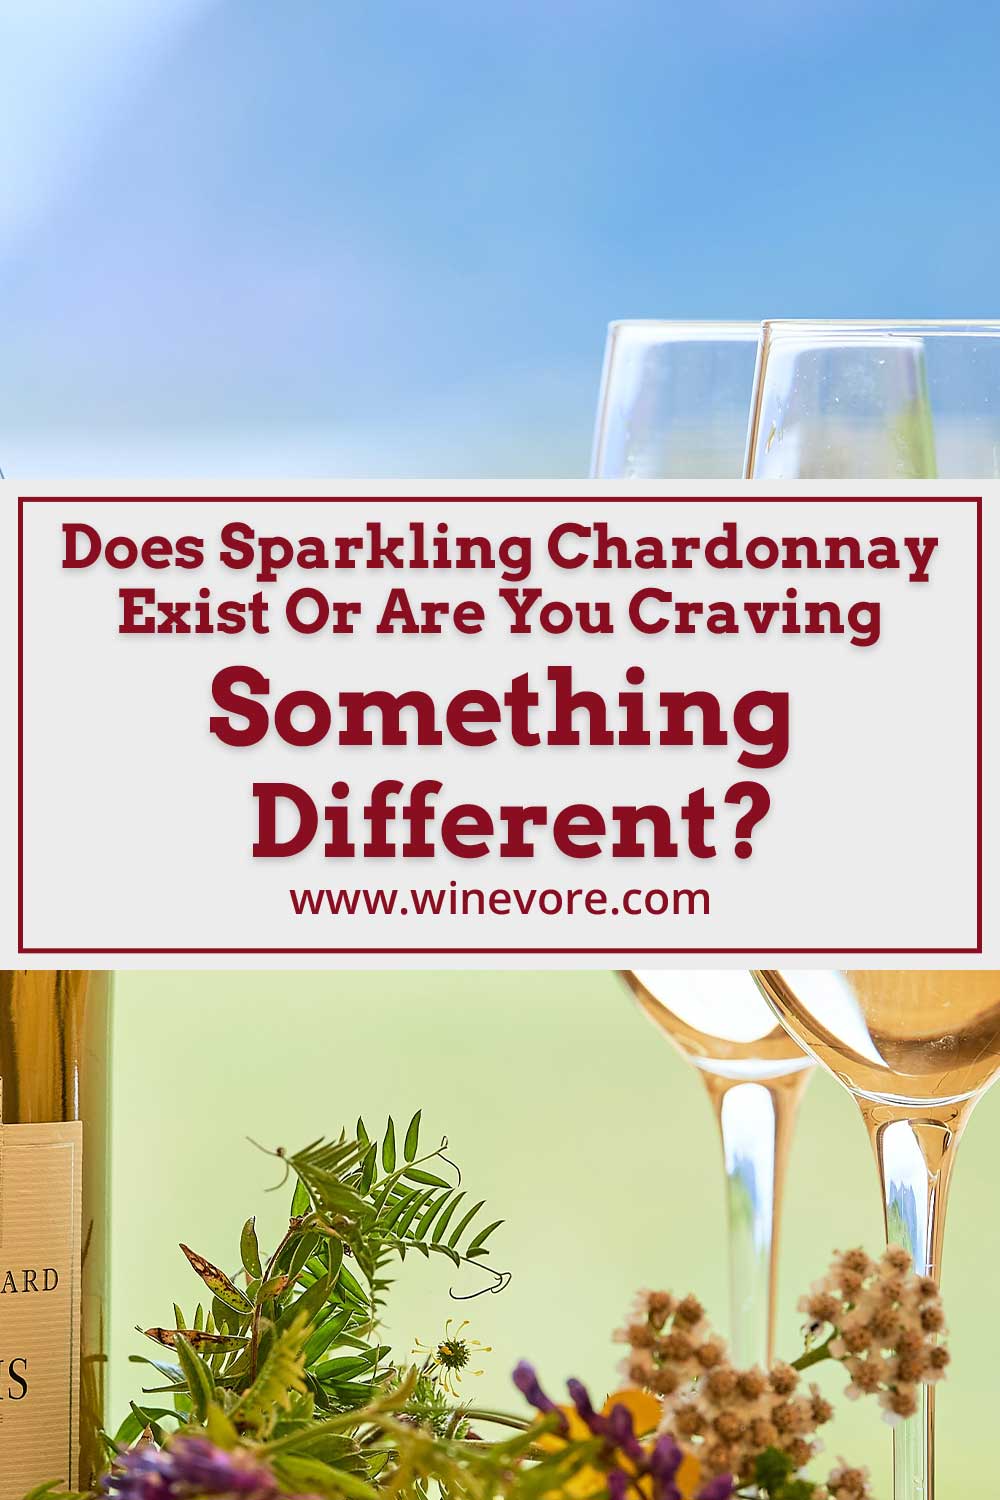 2 glasses of wine and a bottle with some small flowers and grasses - Does Sparkling Chardonnay Exist?